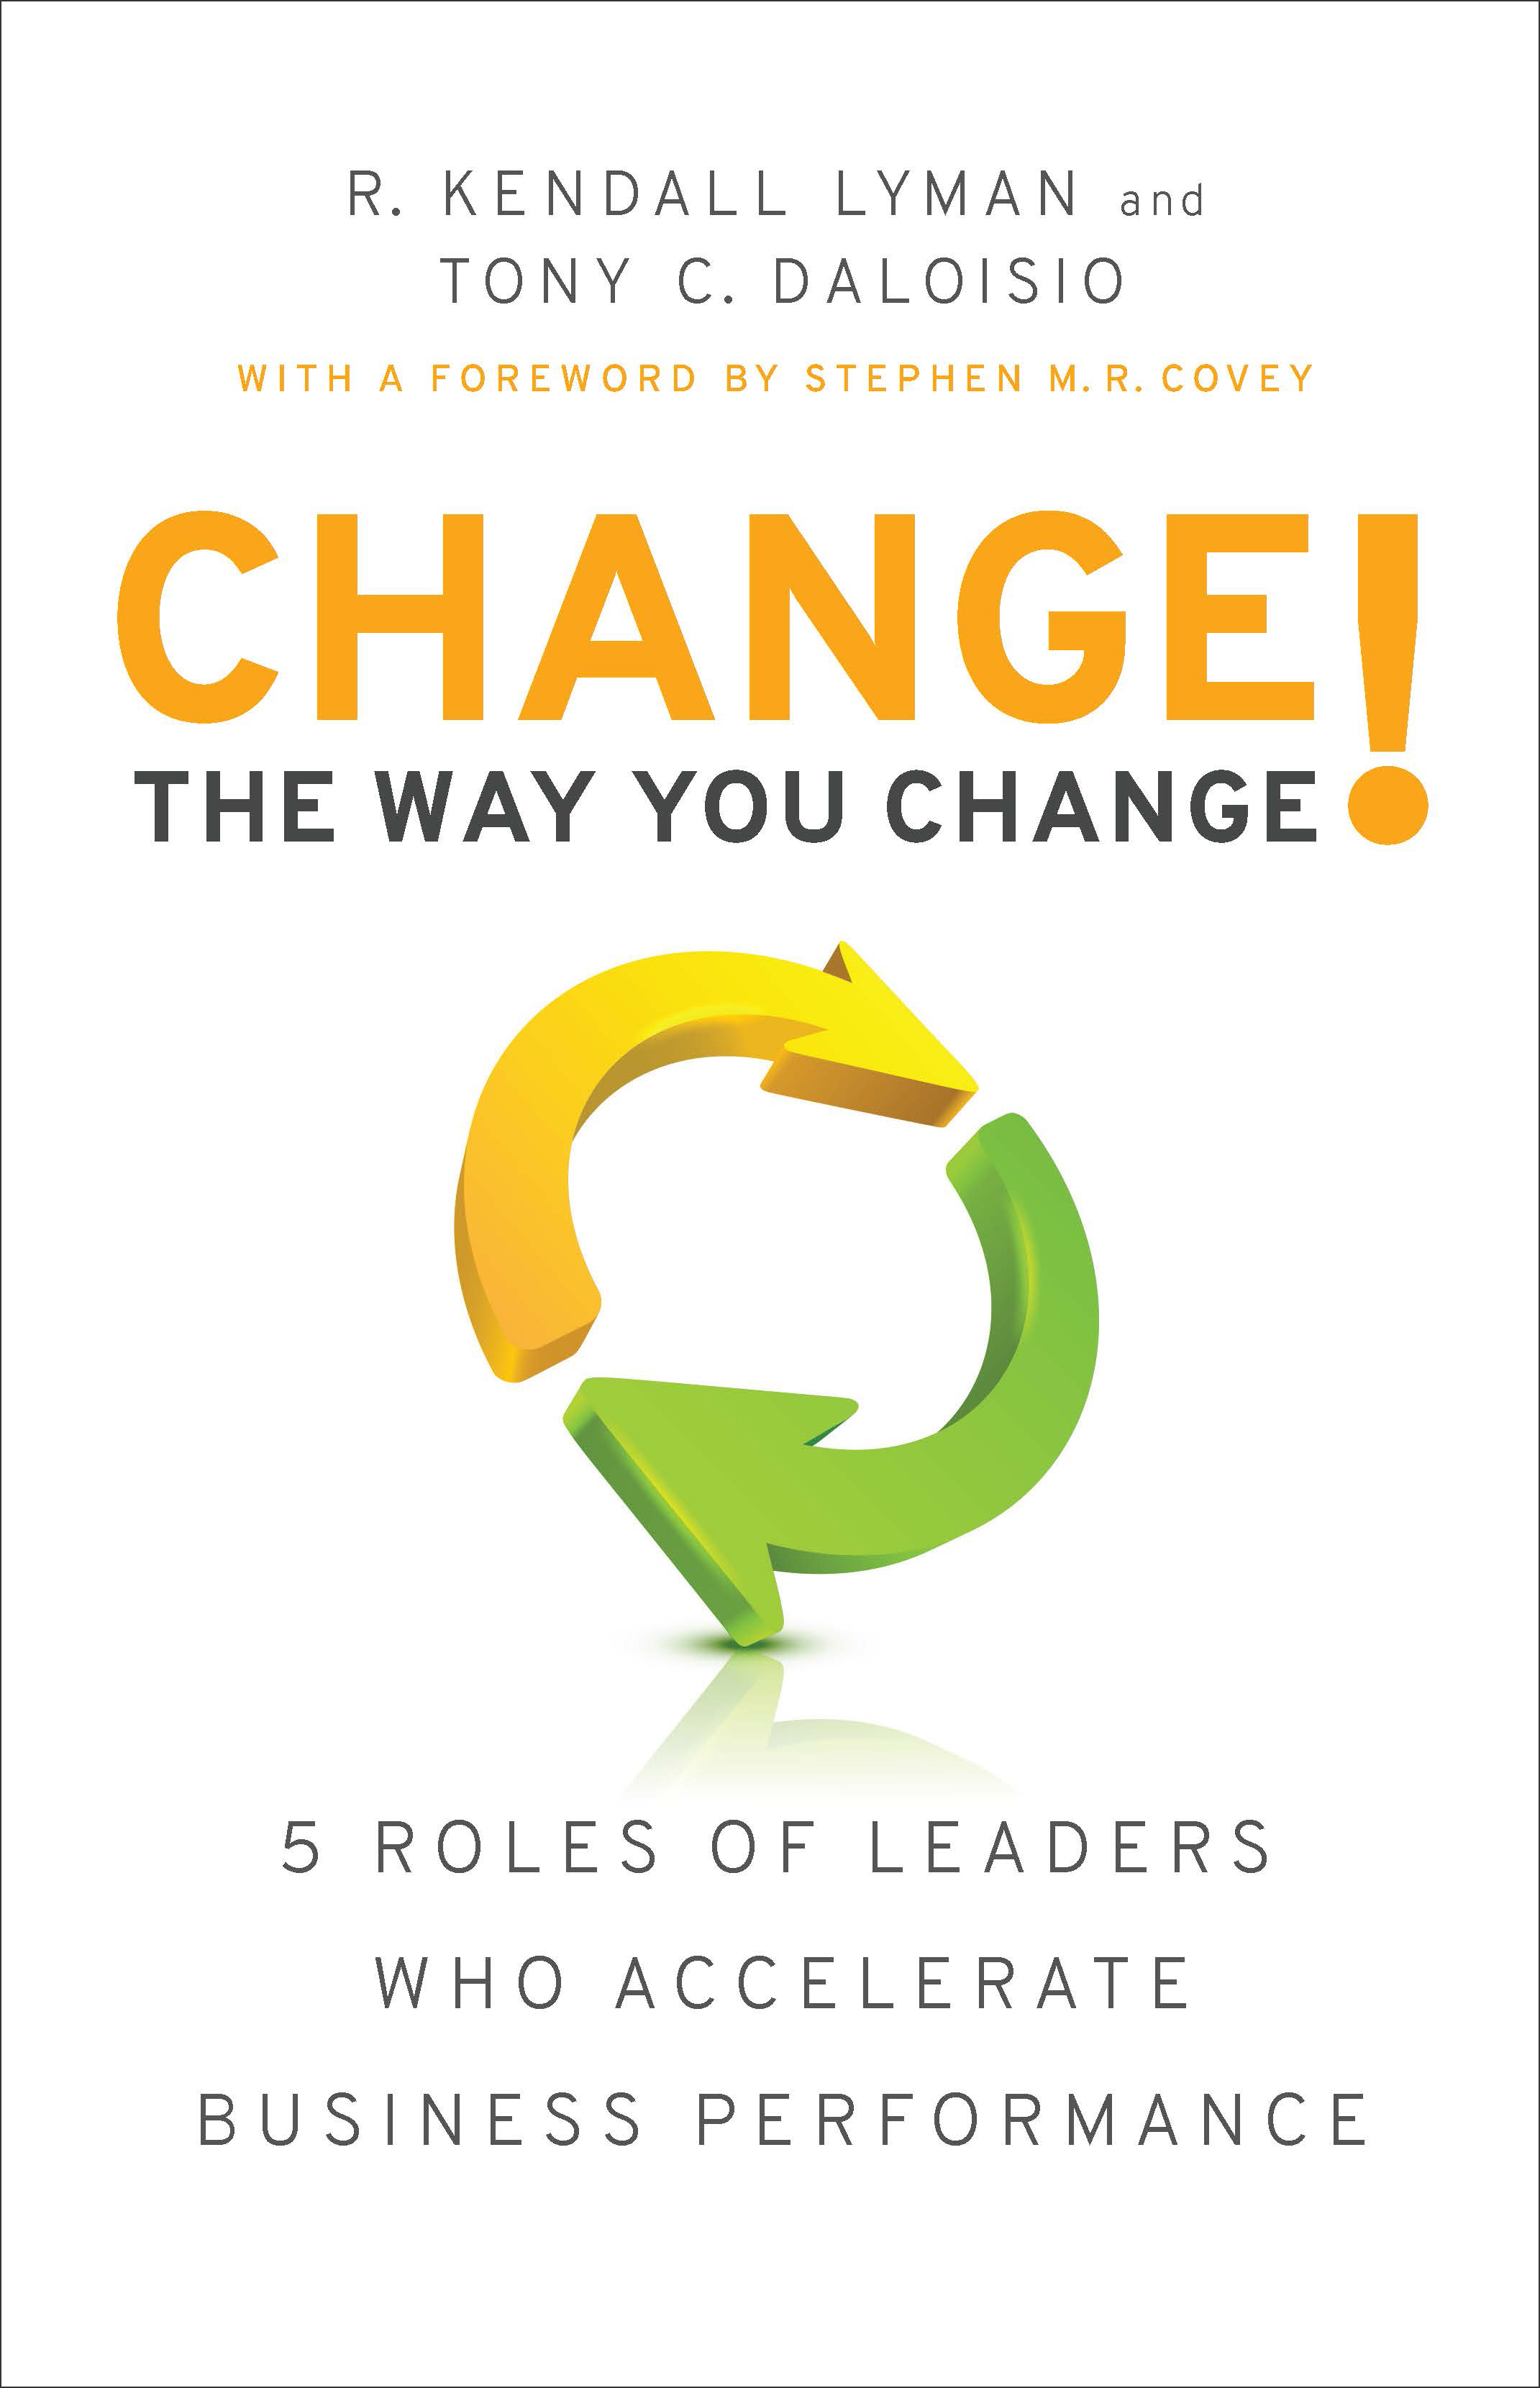 Change the Way You Change!: 5 Roles of Leaders Who Accelerate Business Performance